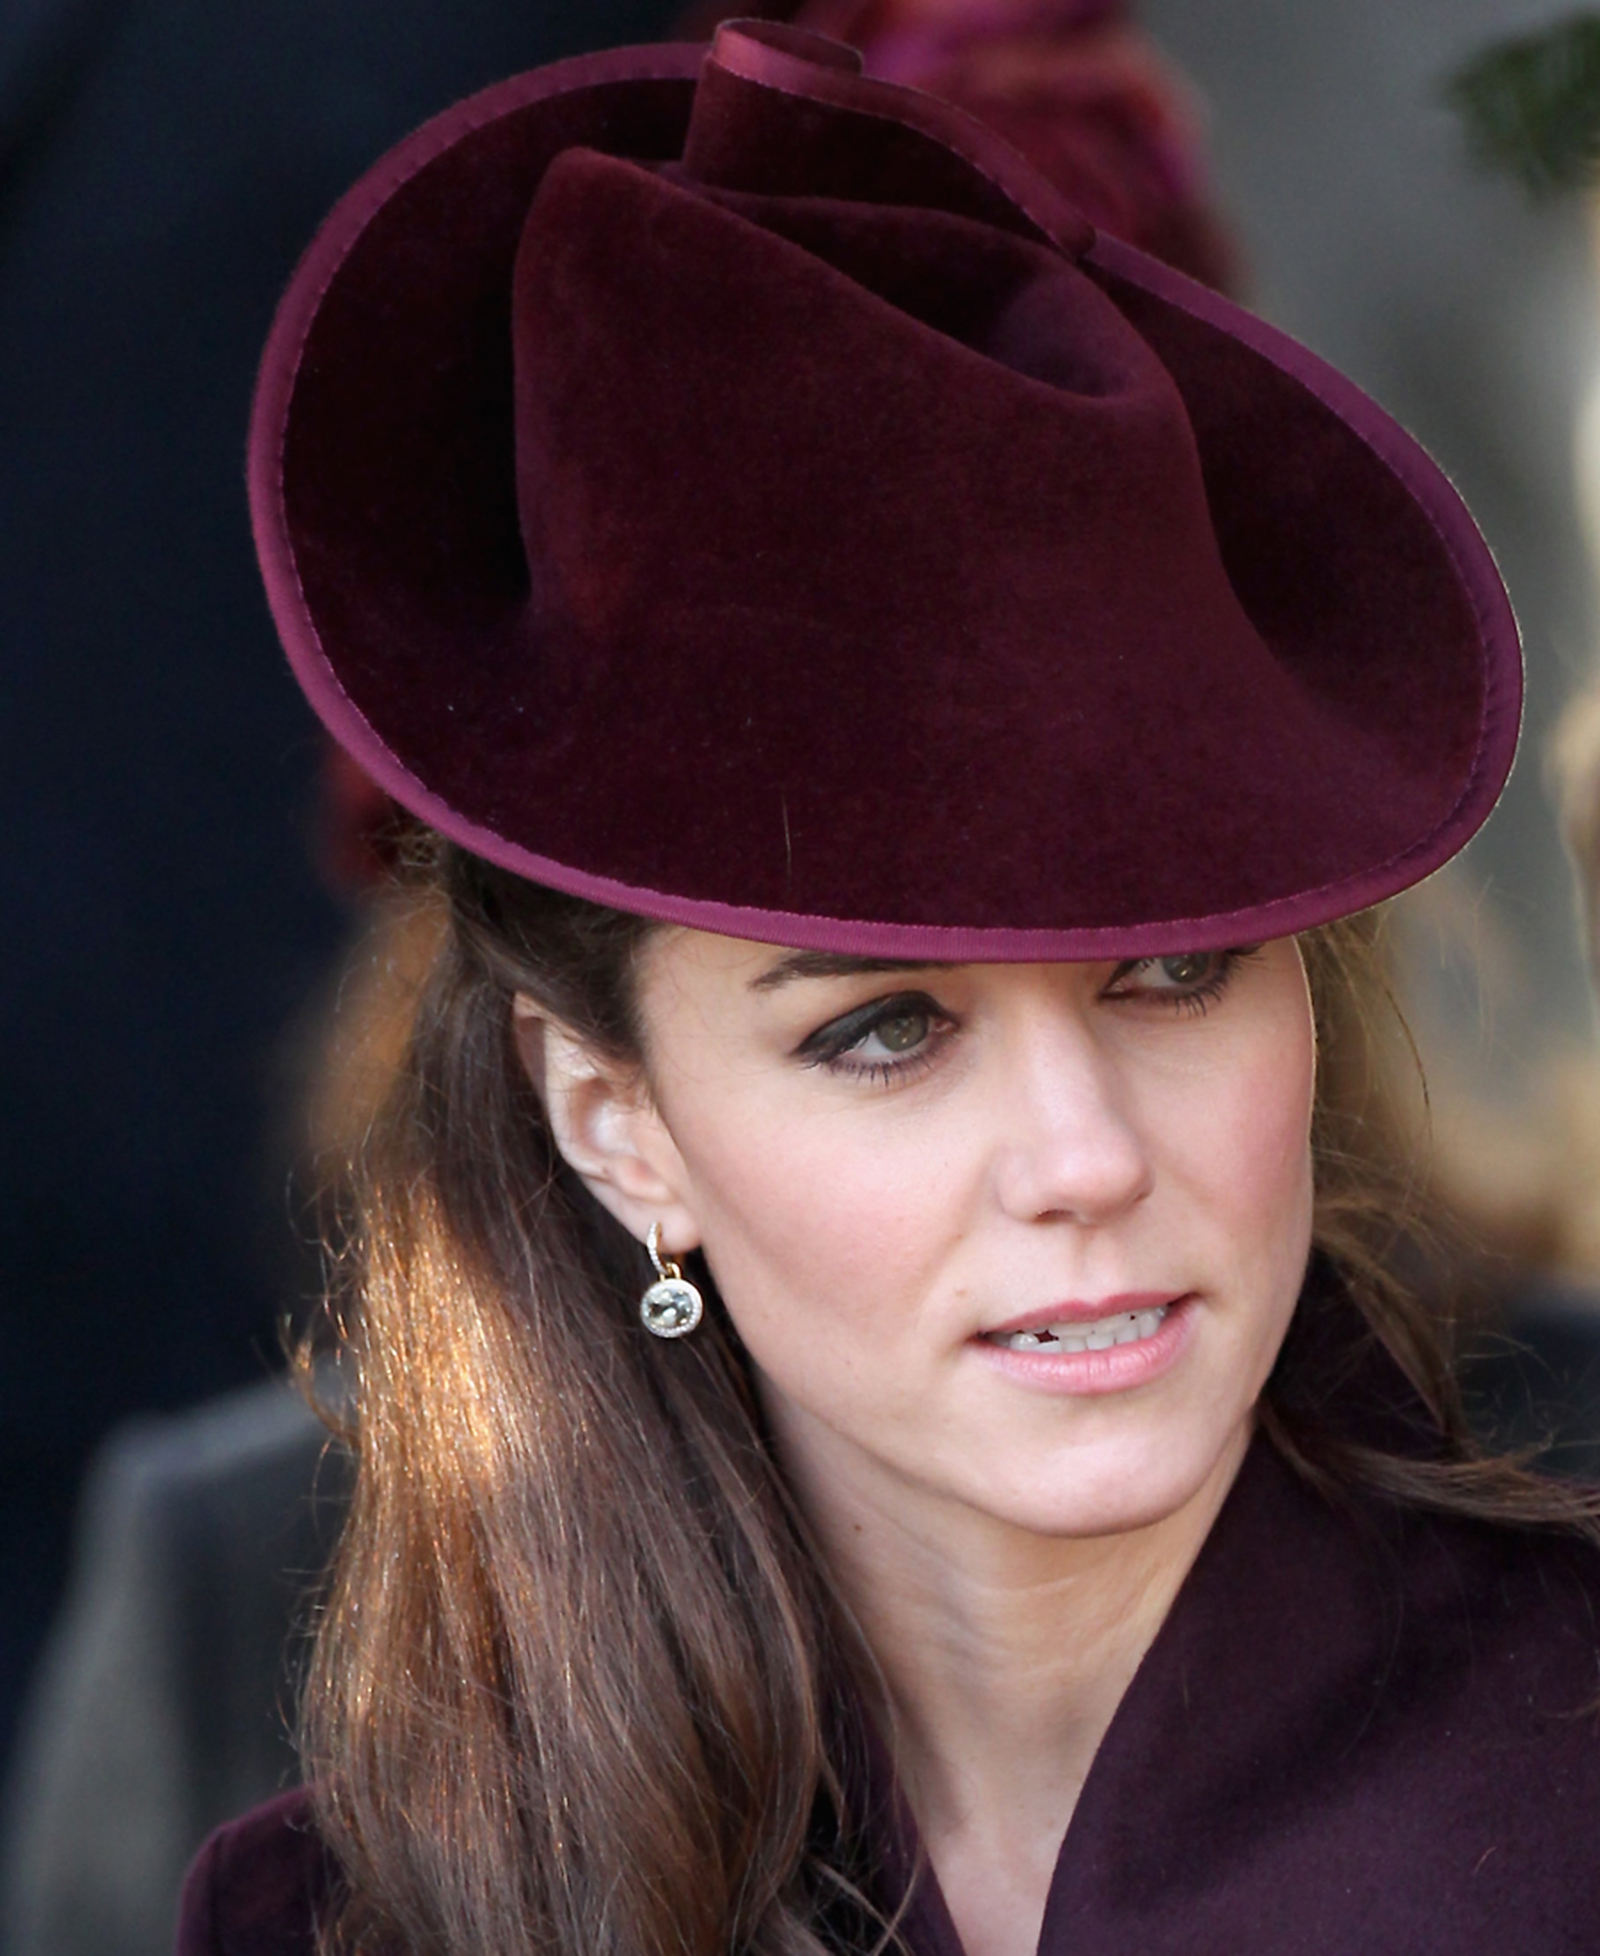 Duchess of Cambridge is hat person of the year